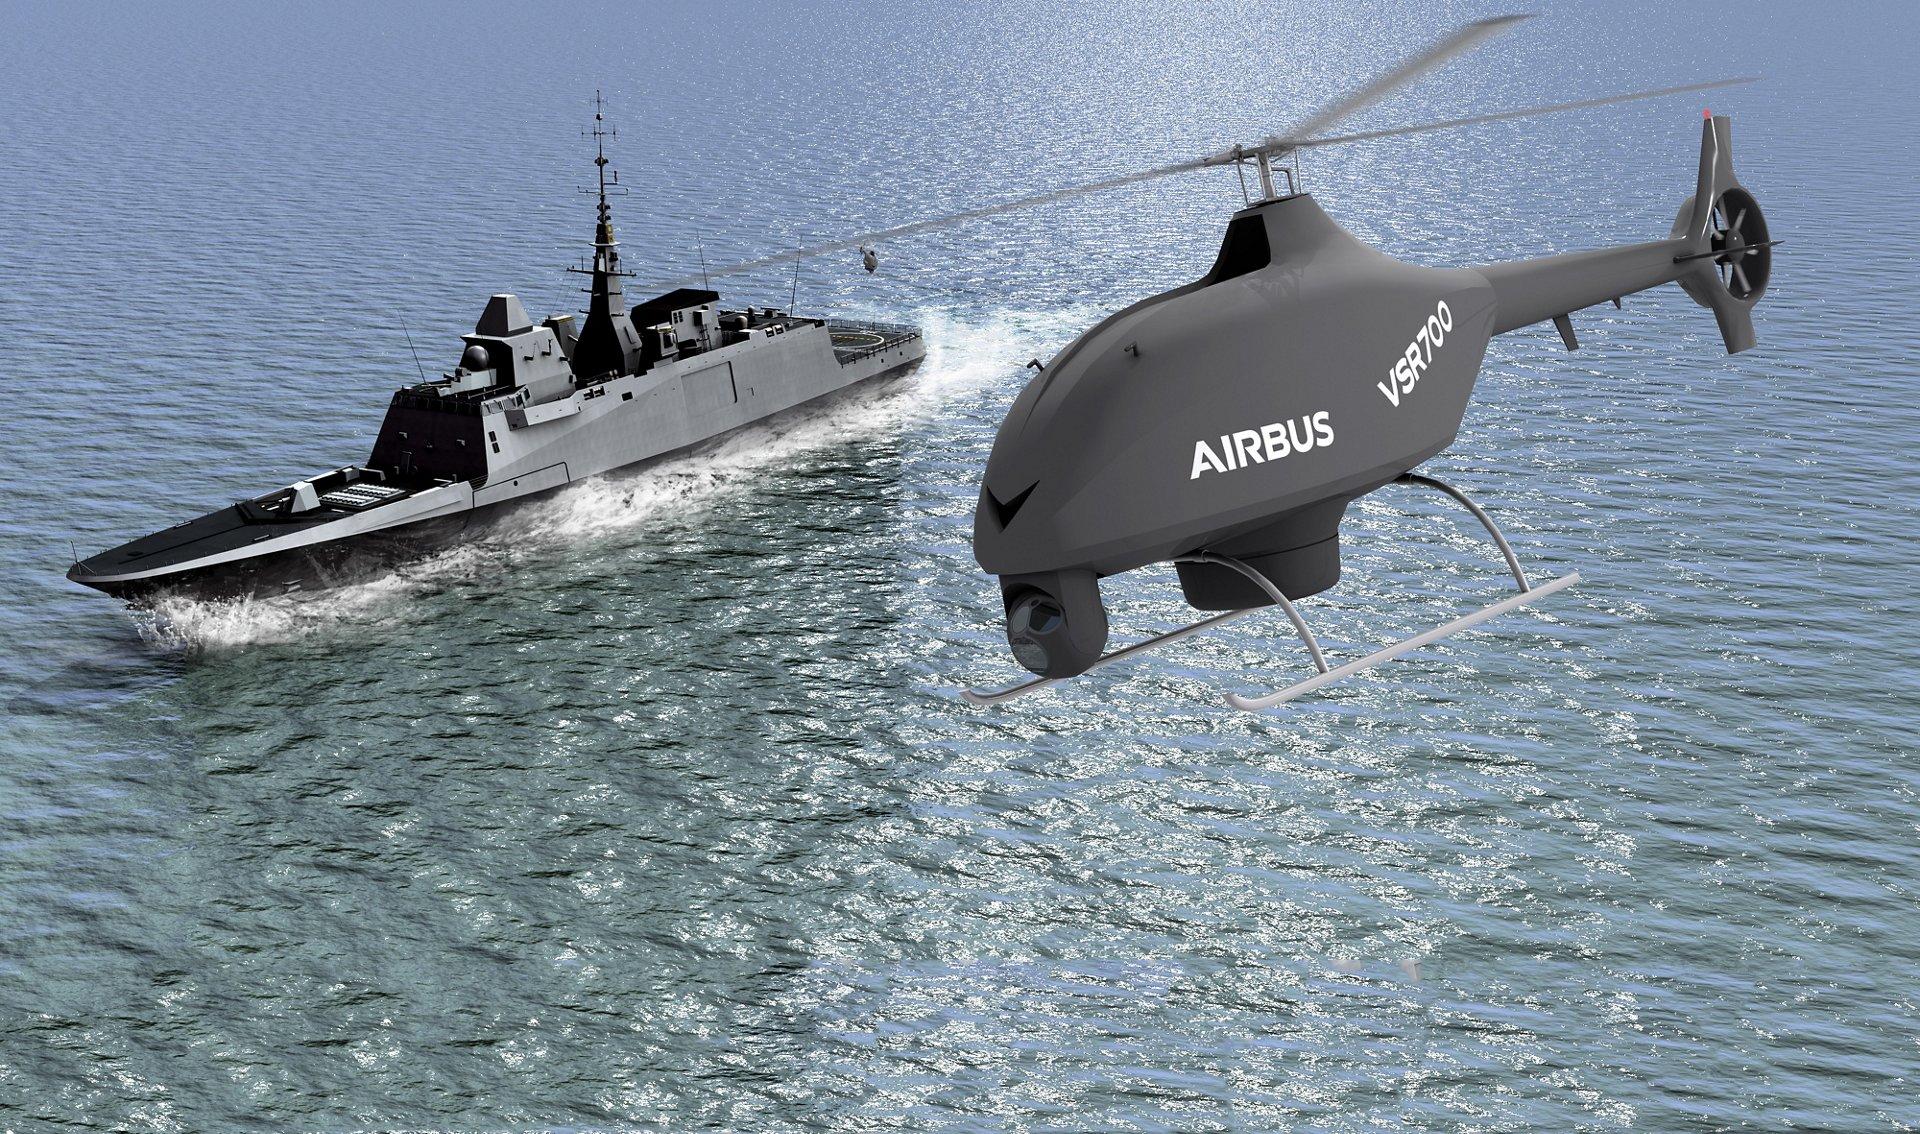 Airbus VSR700 unmanned helicopter